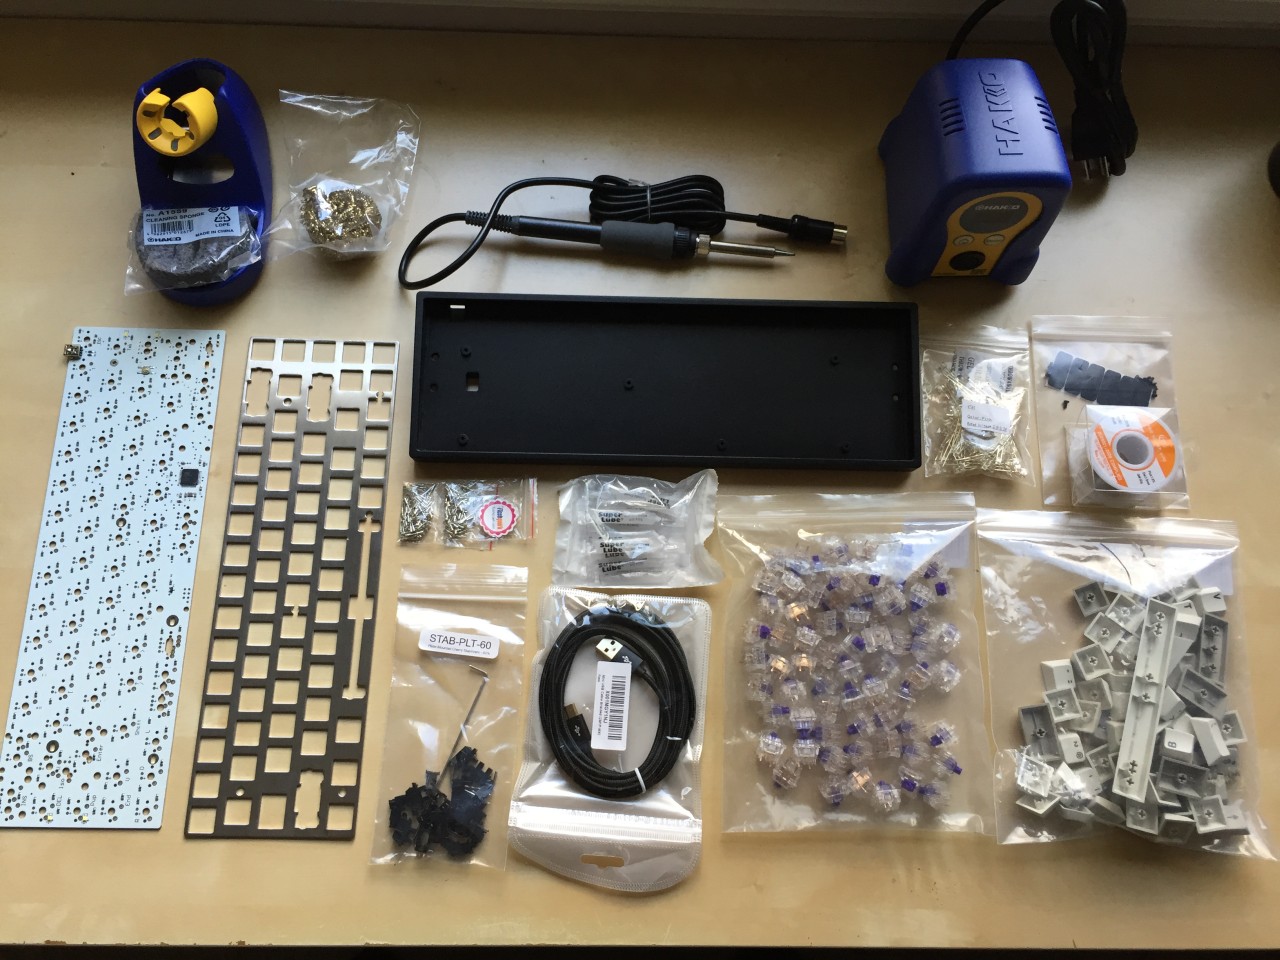 All the TADA 68 components, plus switches and soldering iron